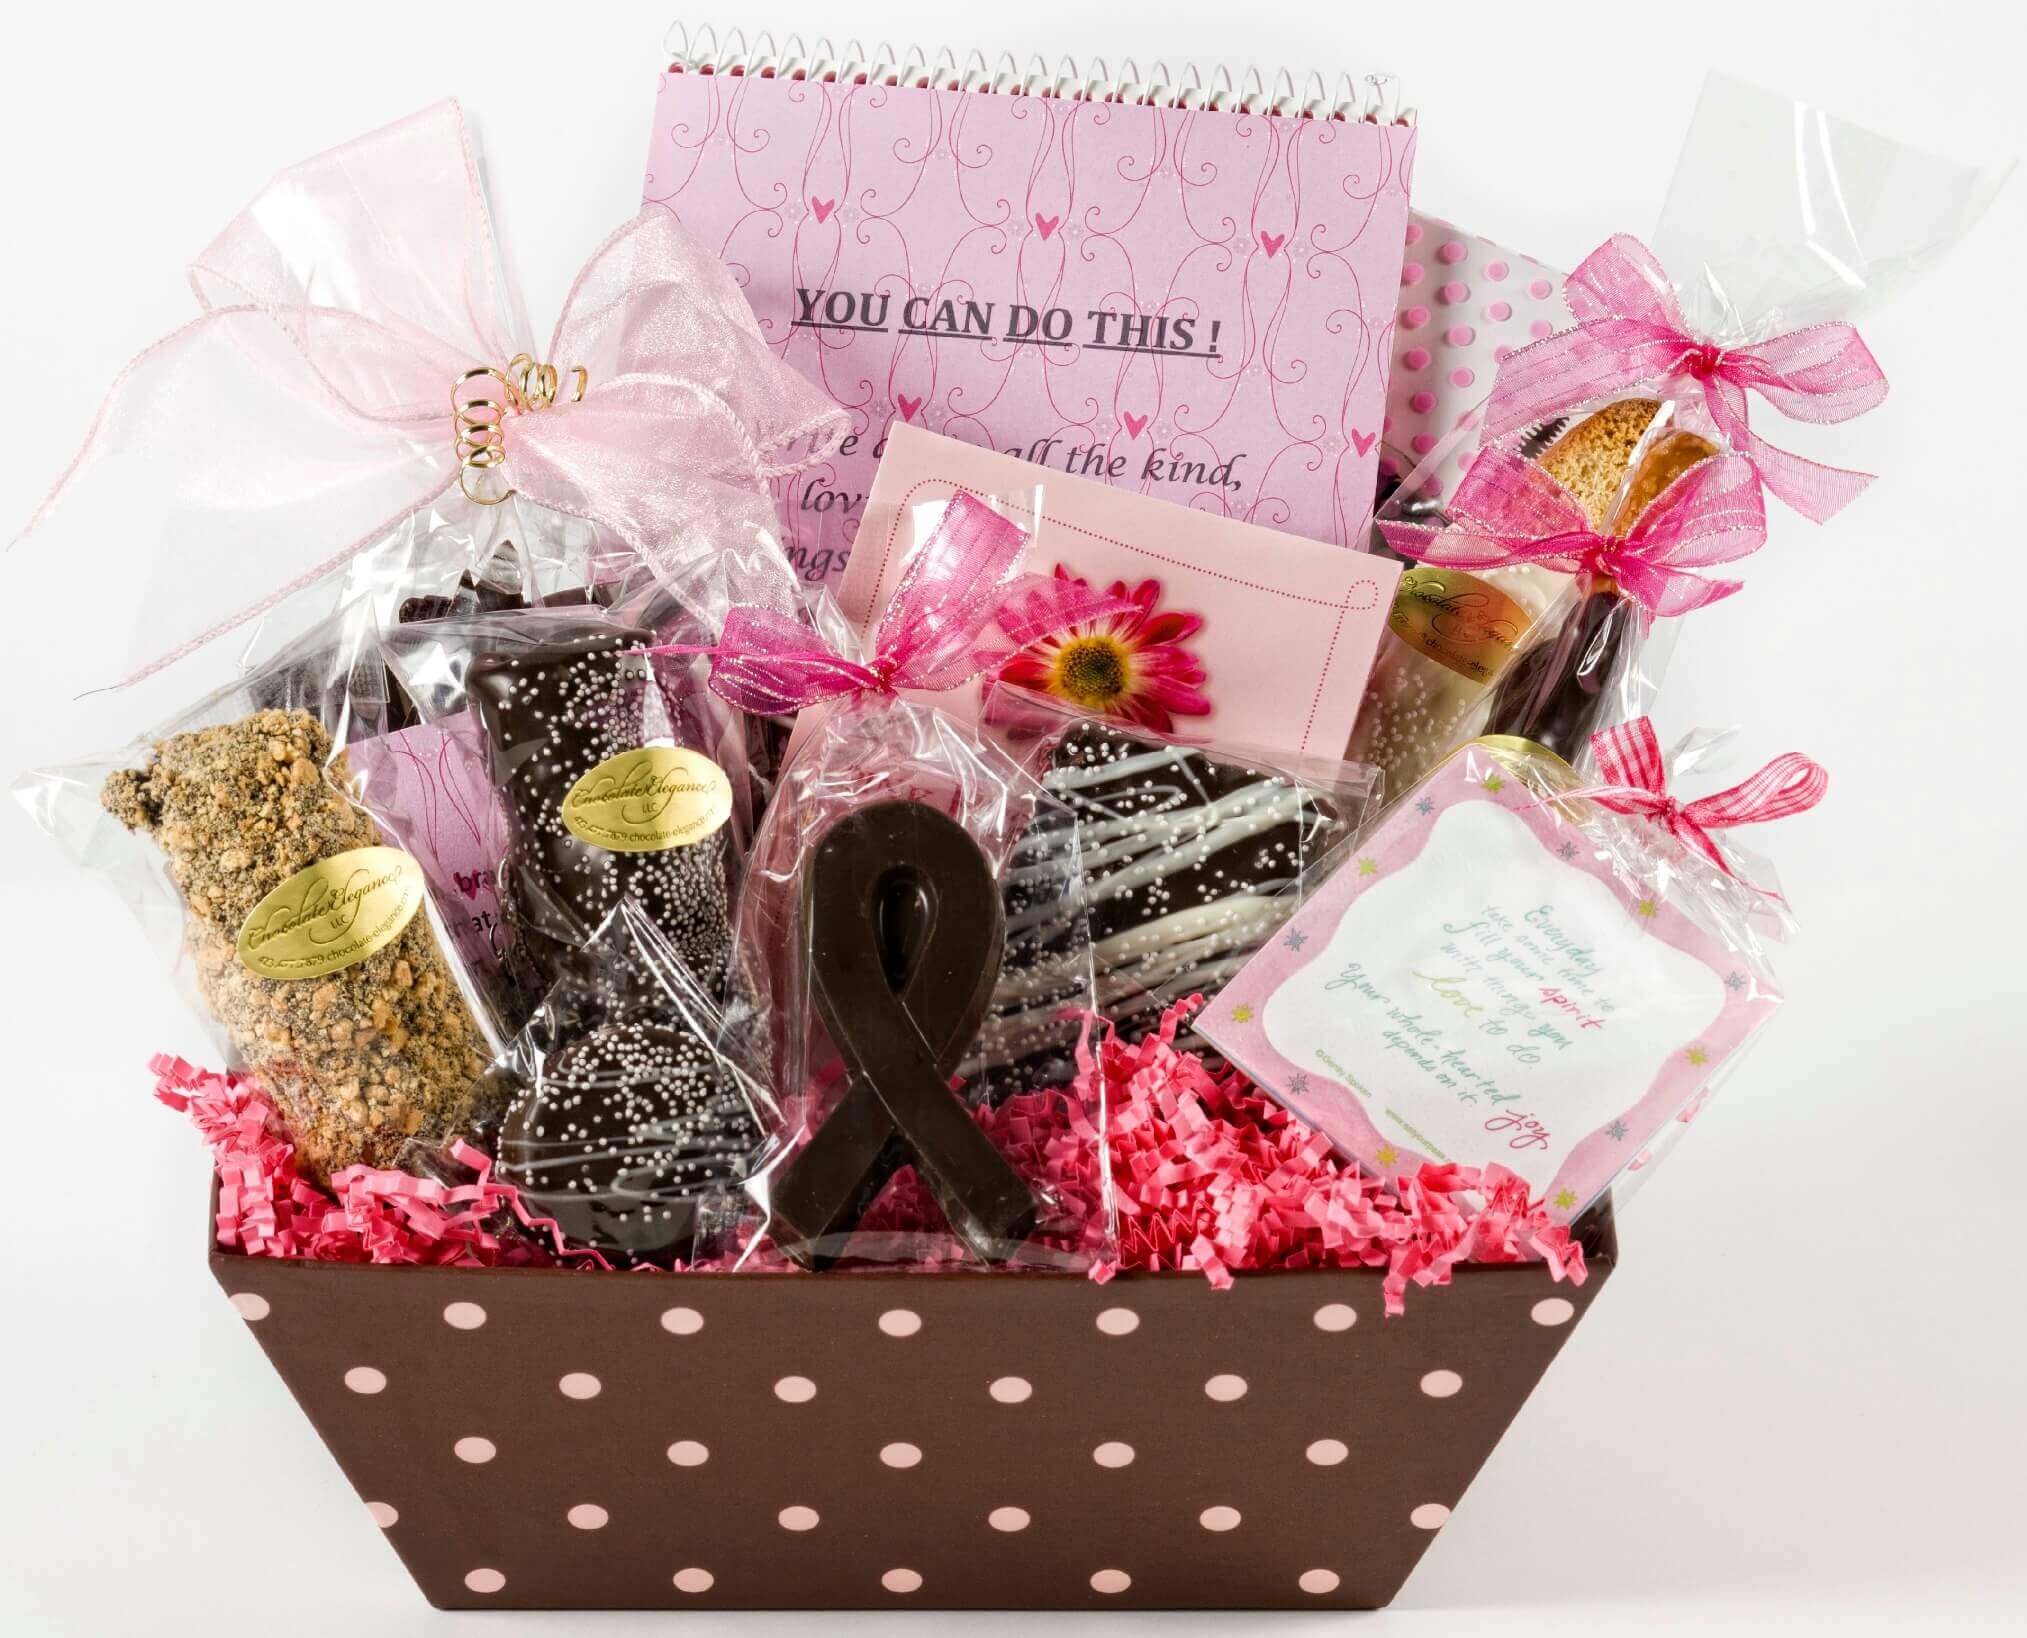 10-the-origin-gift-basket-ideas-for-mastectomy-patient